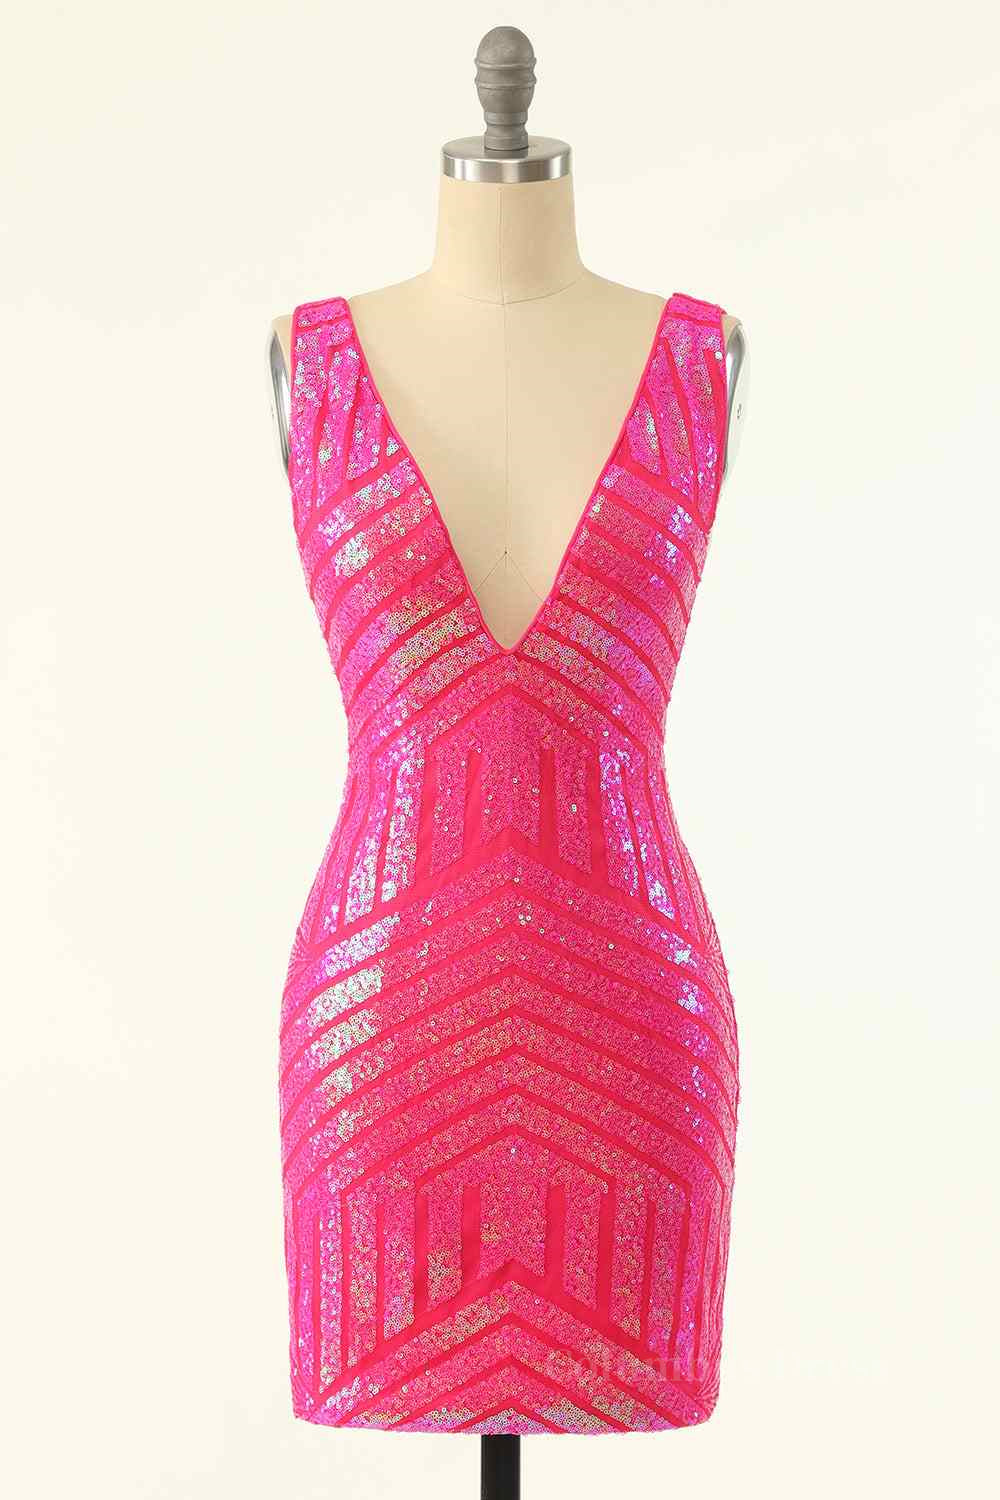 Hot Pink Sheath V Neck Sequin-Embroidered Mini Corset Homecoming Dress outfit, Formal Dress Websites